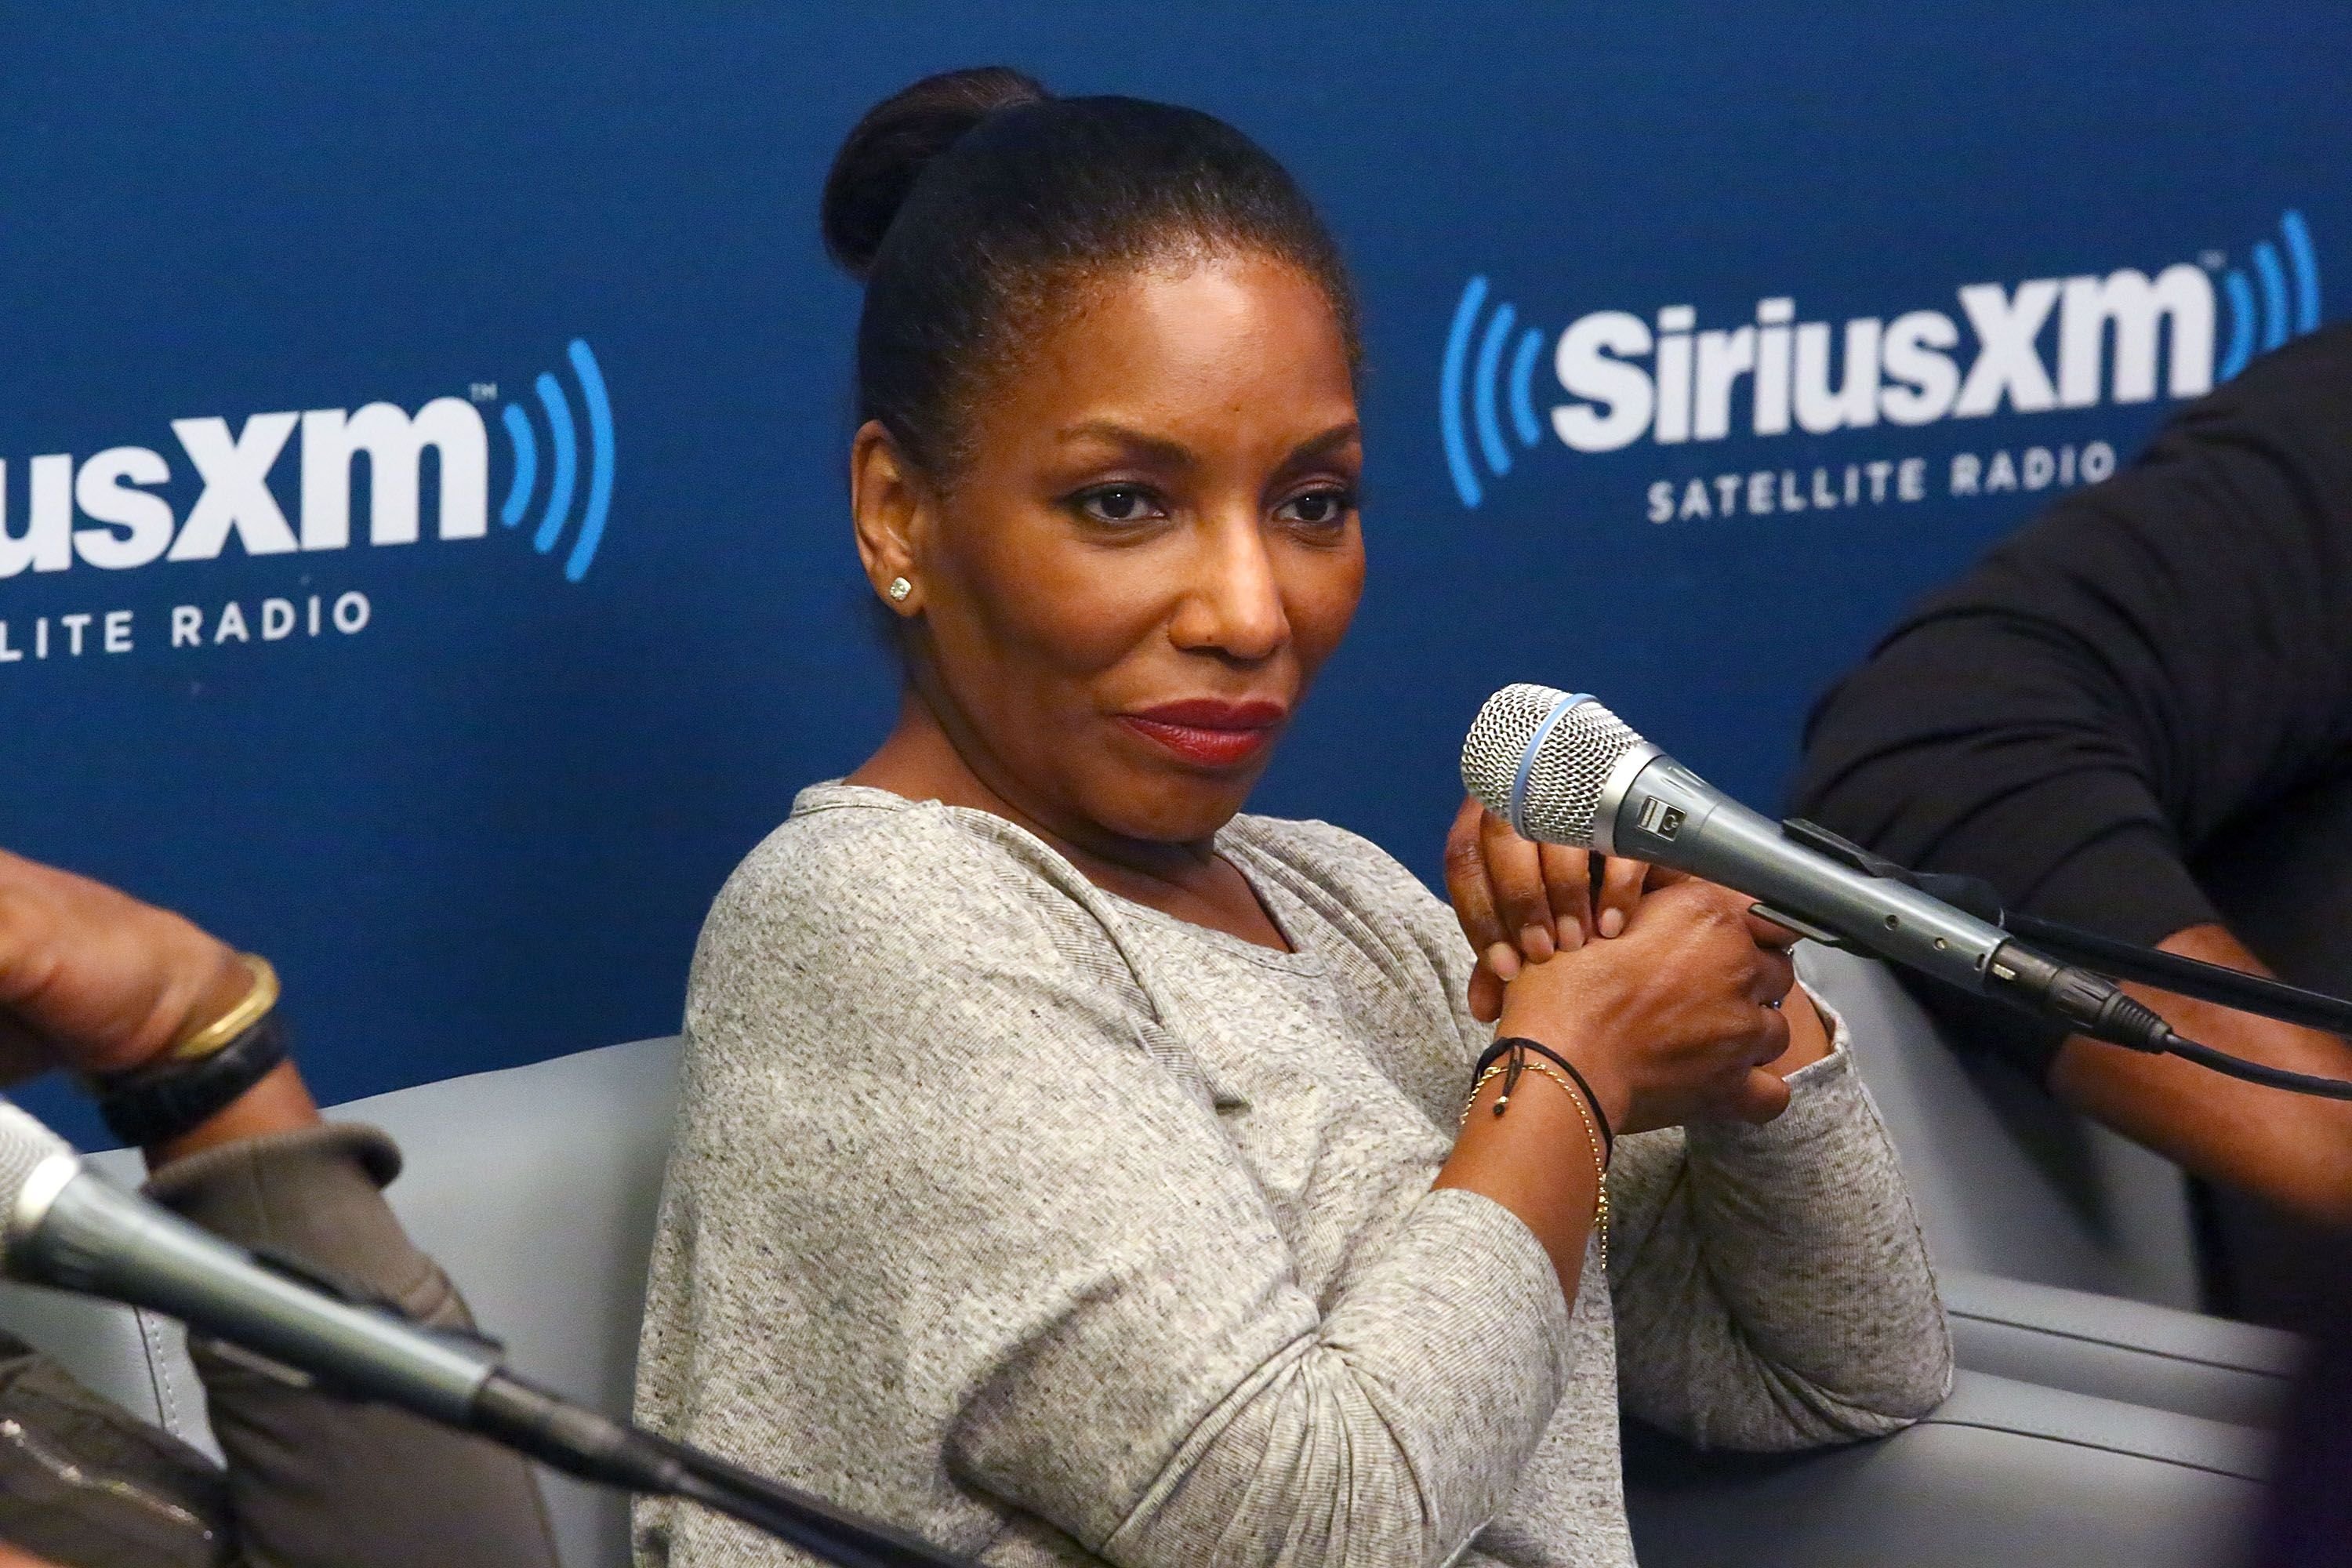 Stephanie Mills attends SiriusXM's Town Hall with the cast of 'The Wiz' hosted by Radio Andy host Bevy Smith at the SiriusXM Studios on October 26, 2015. | Source: Getty Images